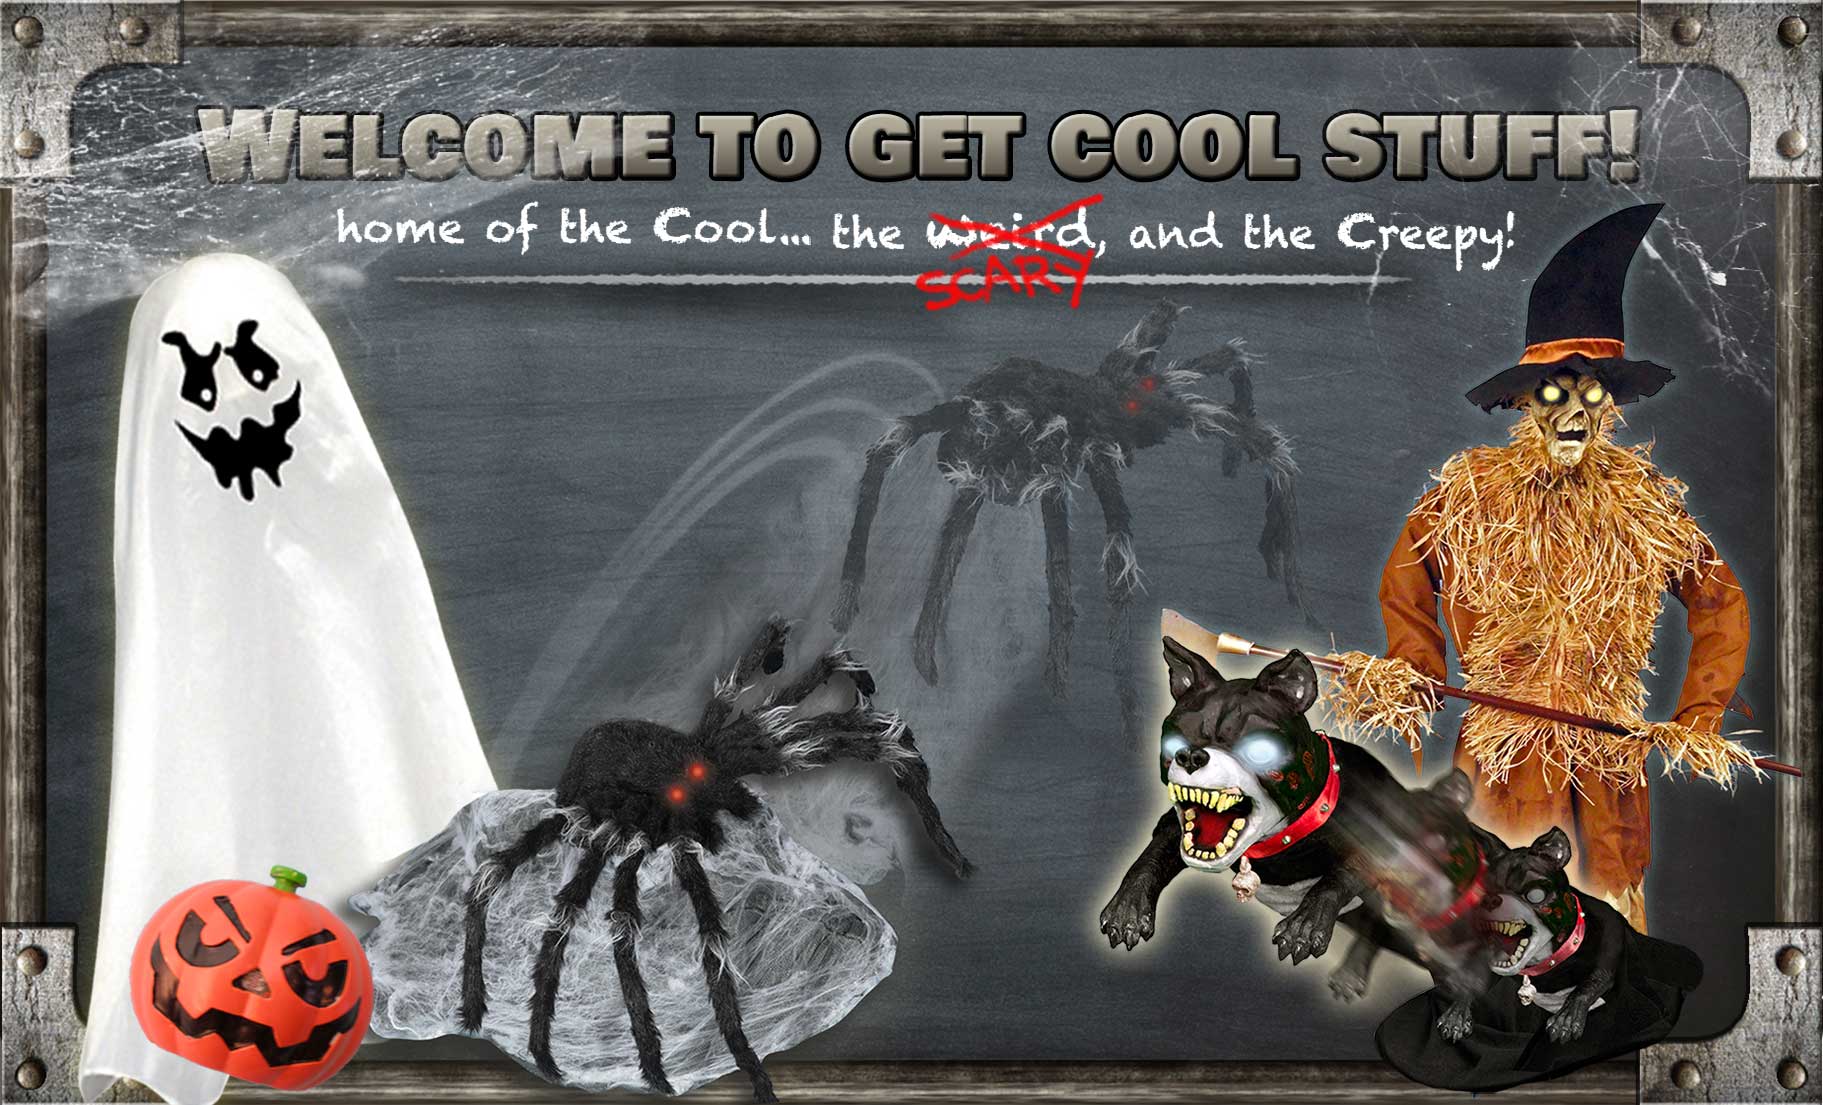 Get Cool Stuff - Home of the cool, the weird, and the creepy!